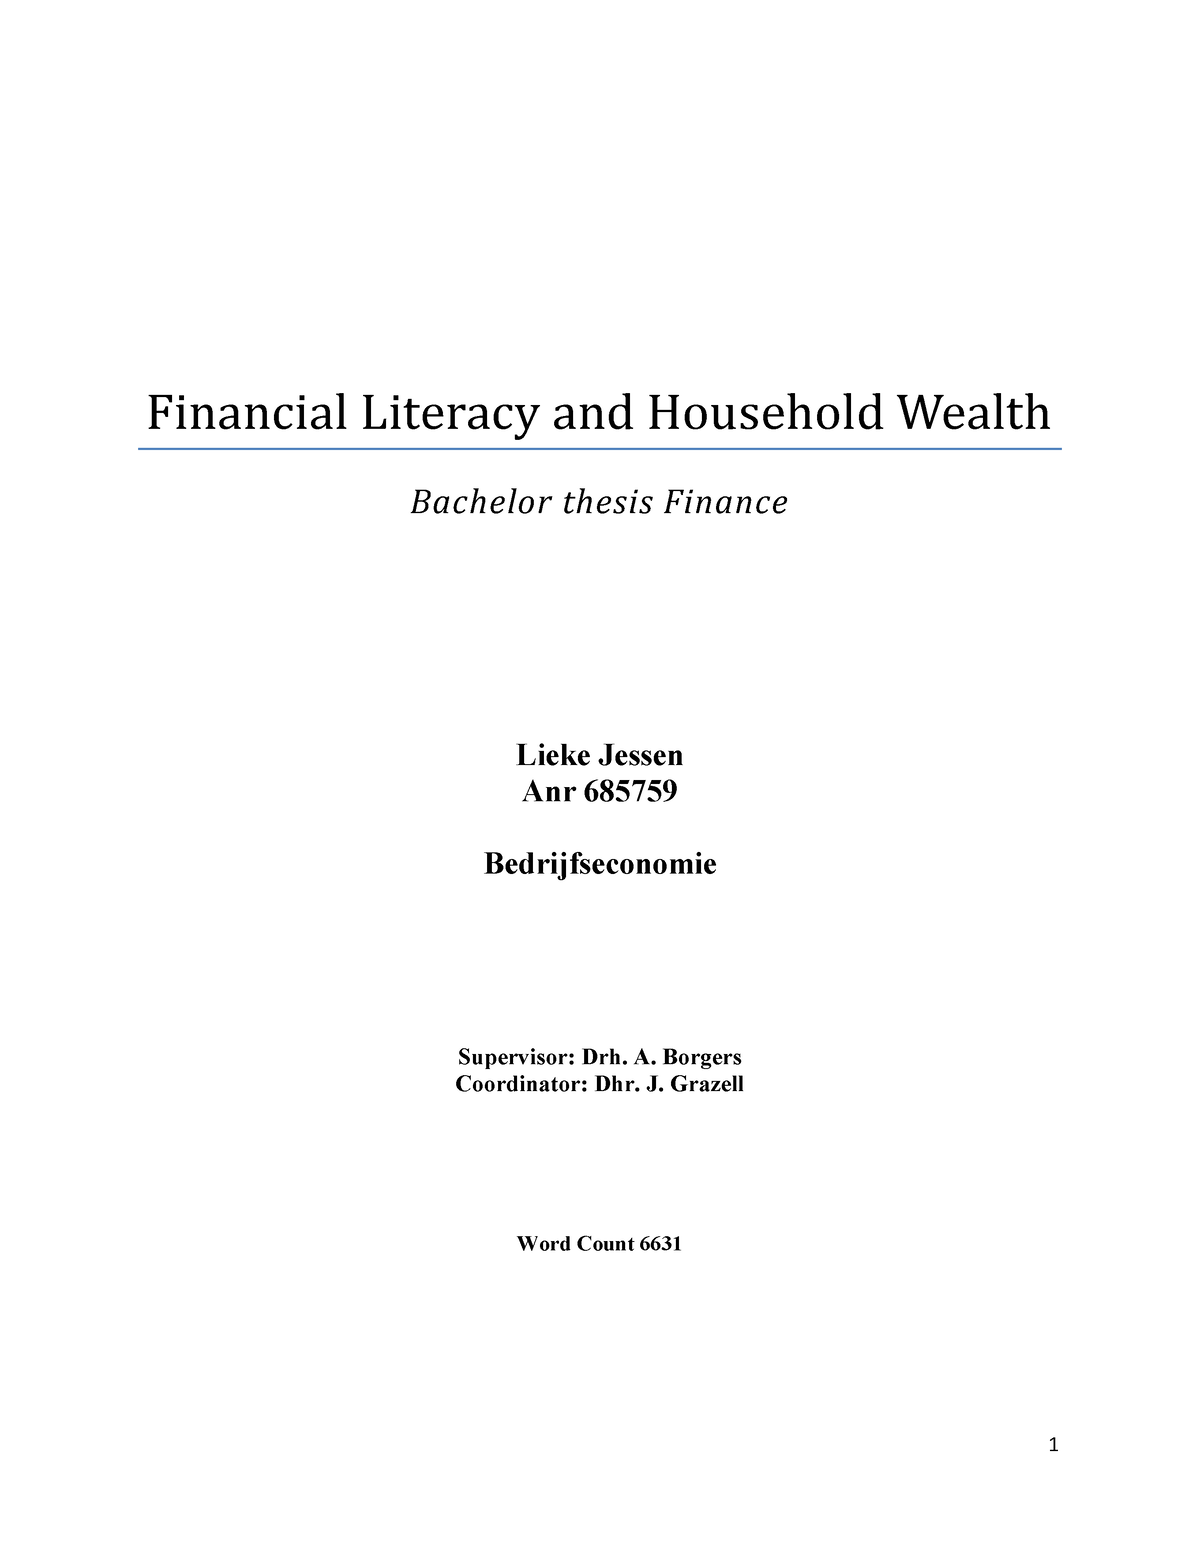 thesis title about financial literacy